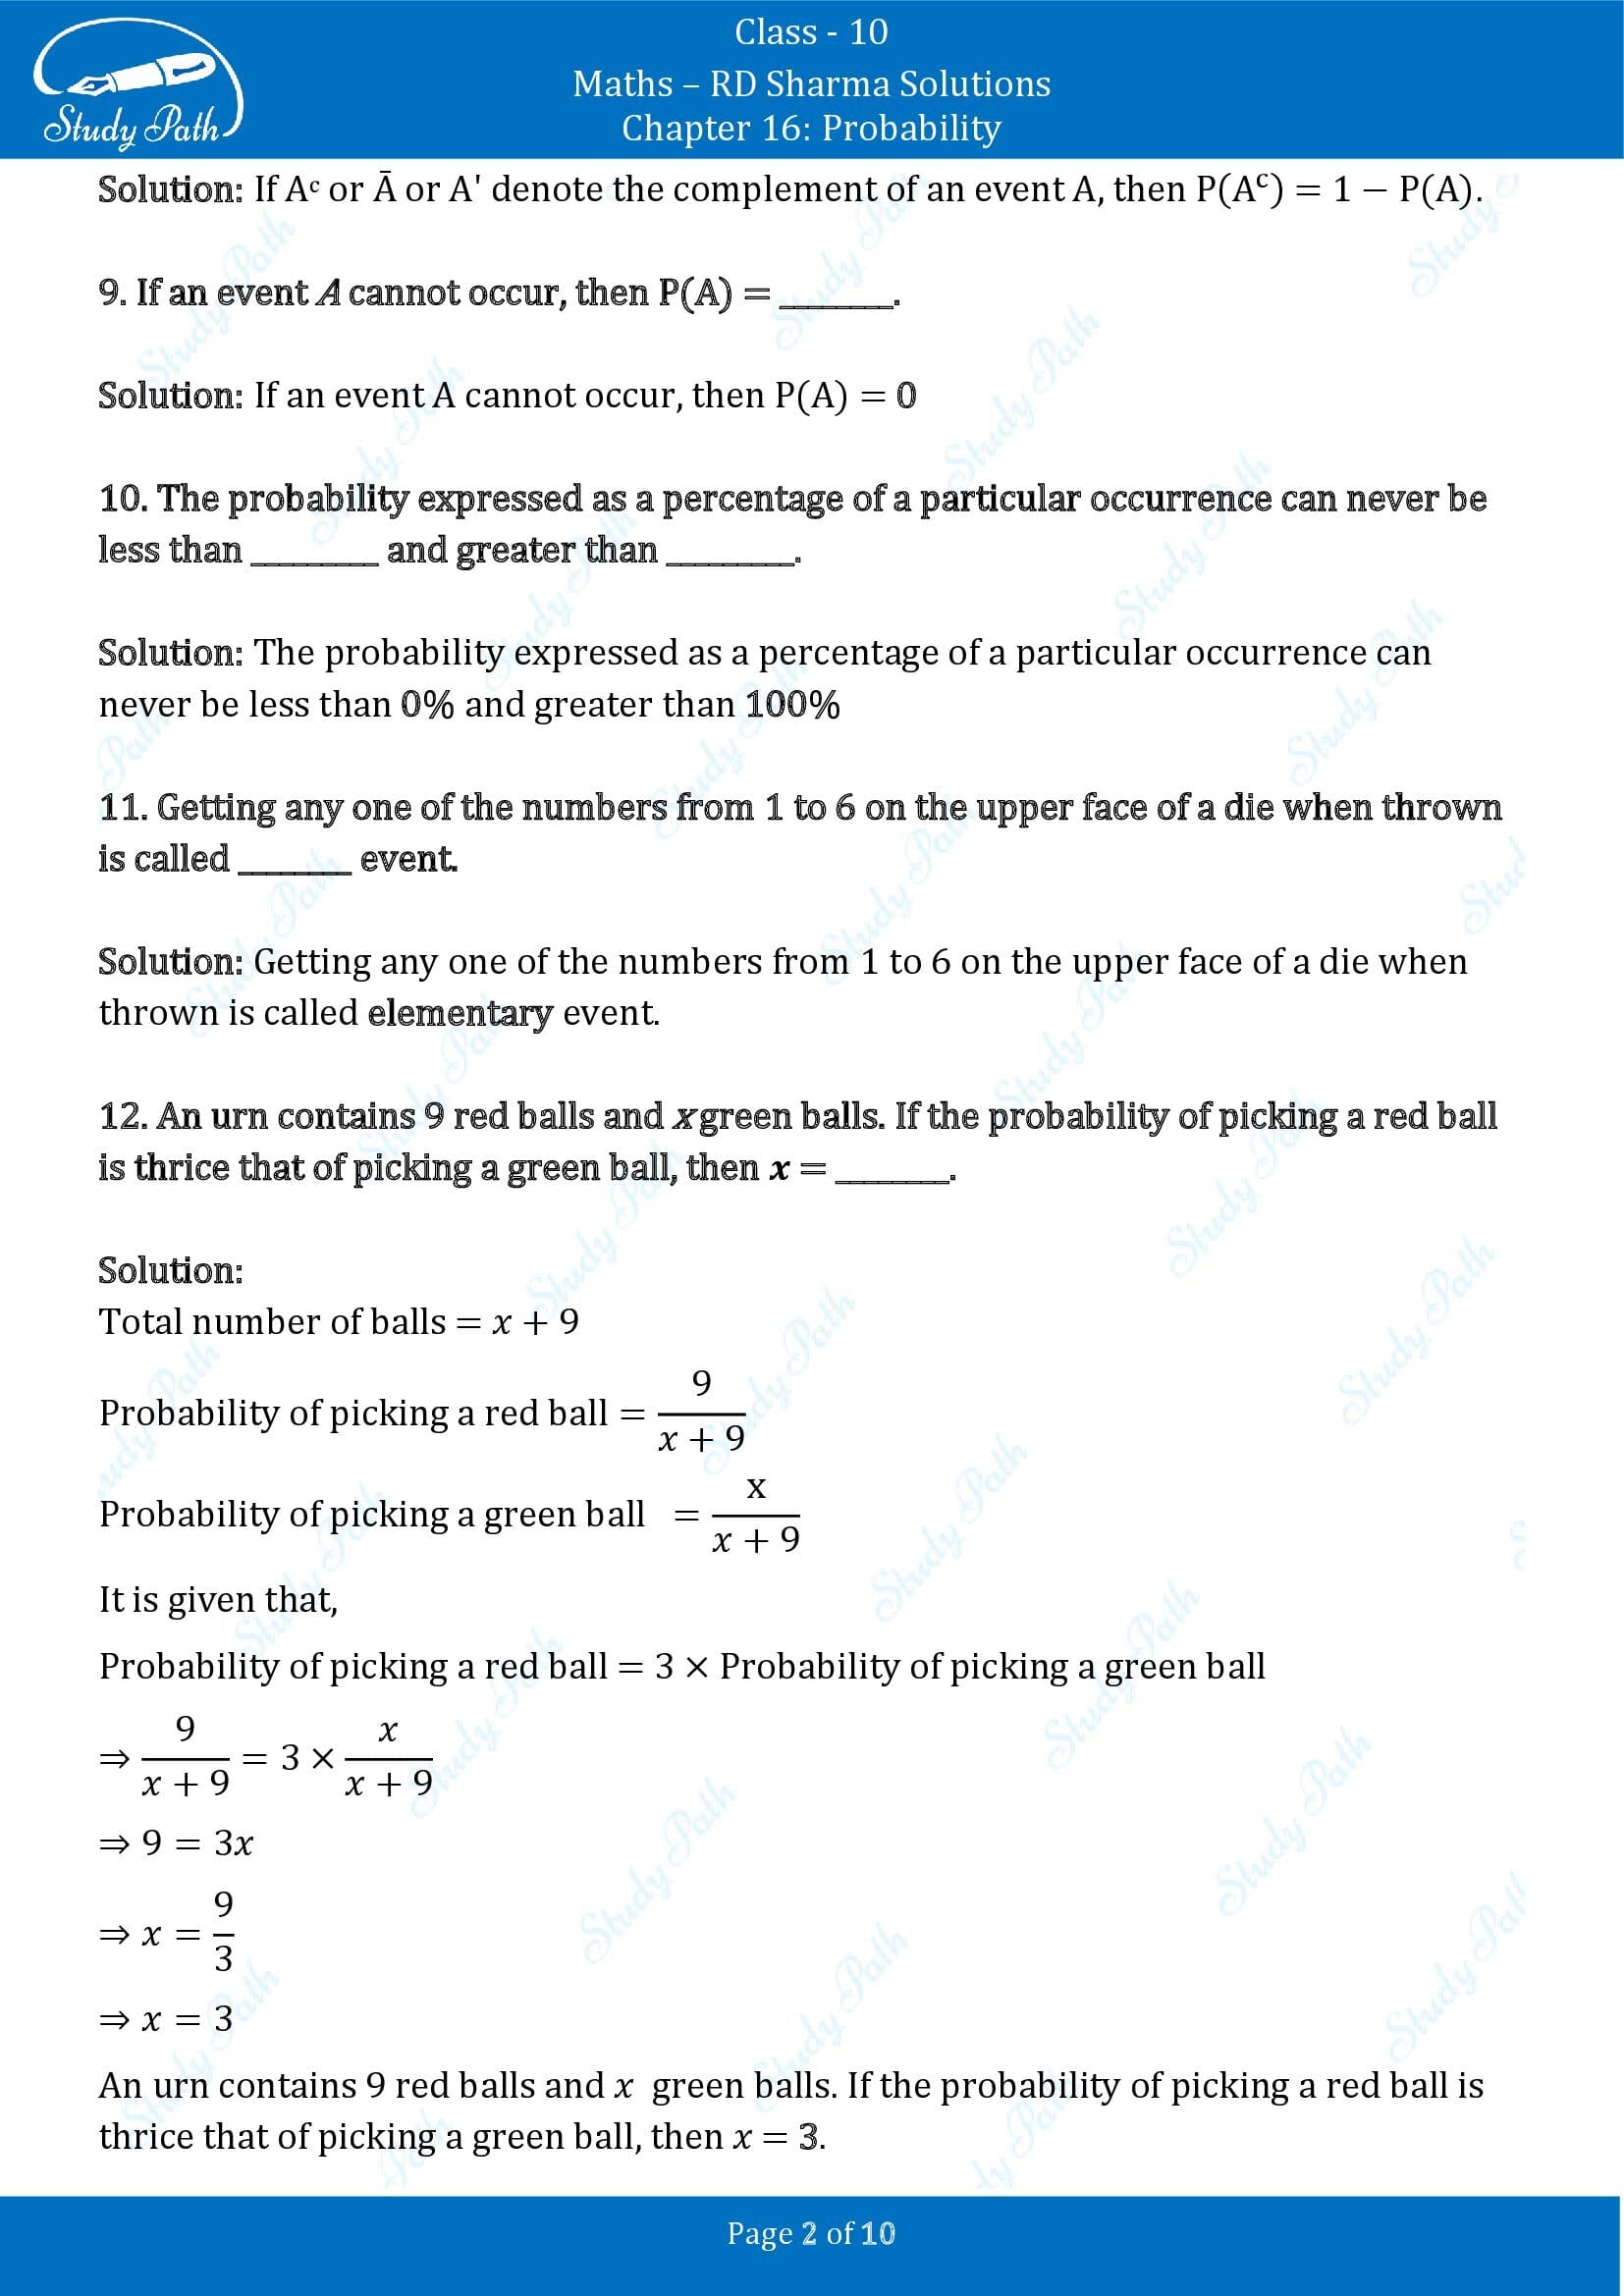 RD Sharma Solutions Class 10 Chapter 16 Probability Fill in the Blank Type Questions FBQs 00002